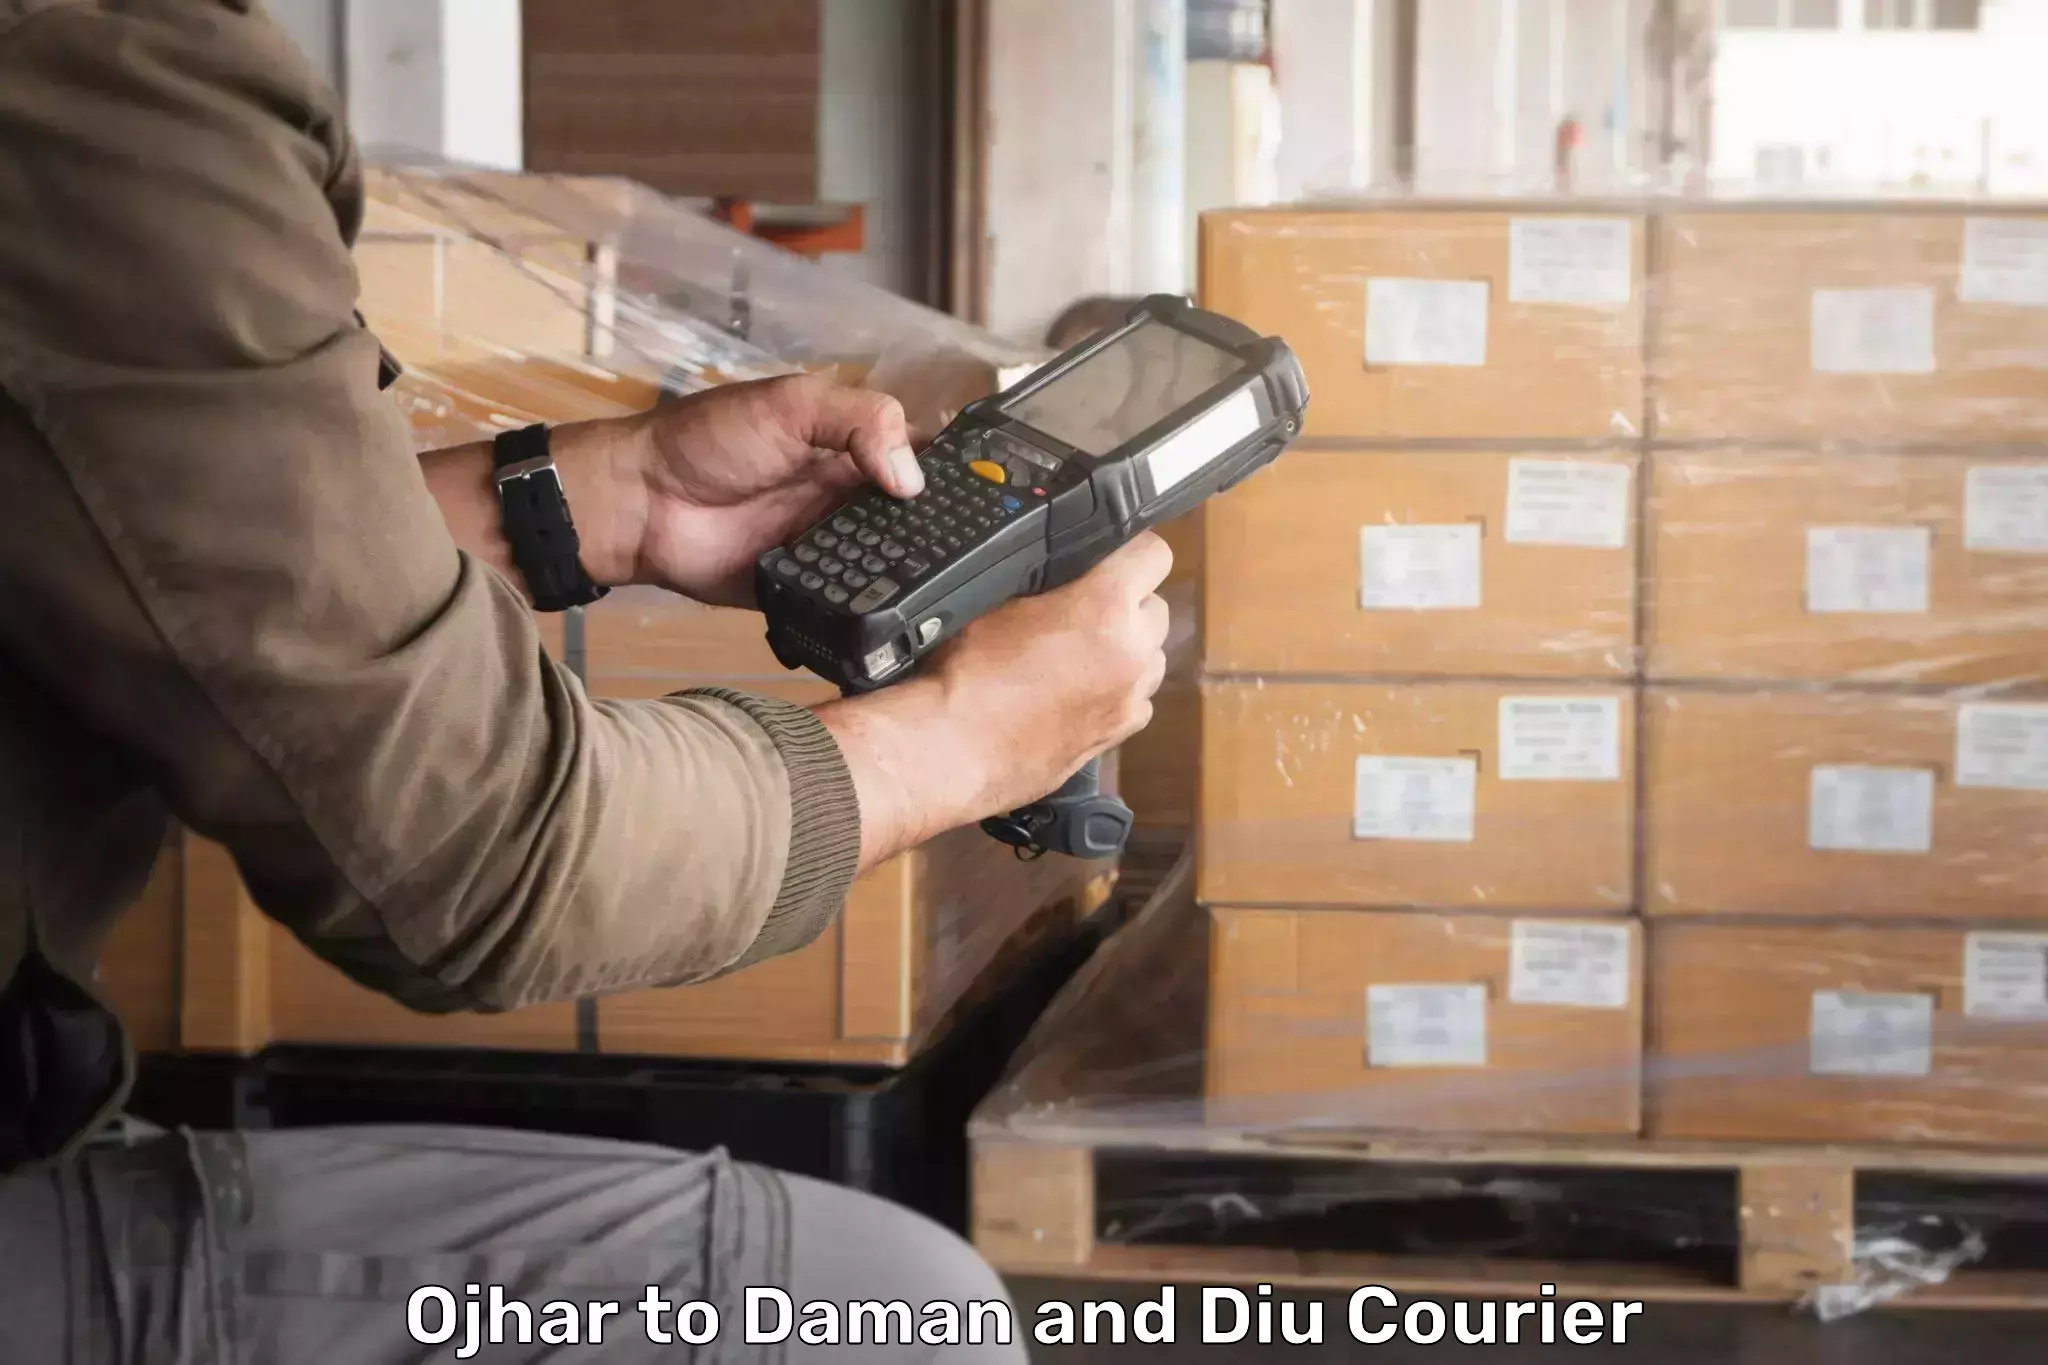 24/7 courier service Ojhar to Daman and Diu